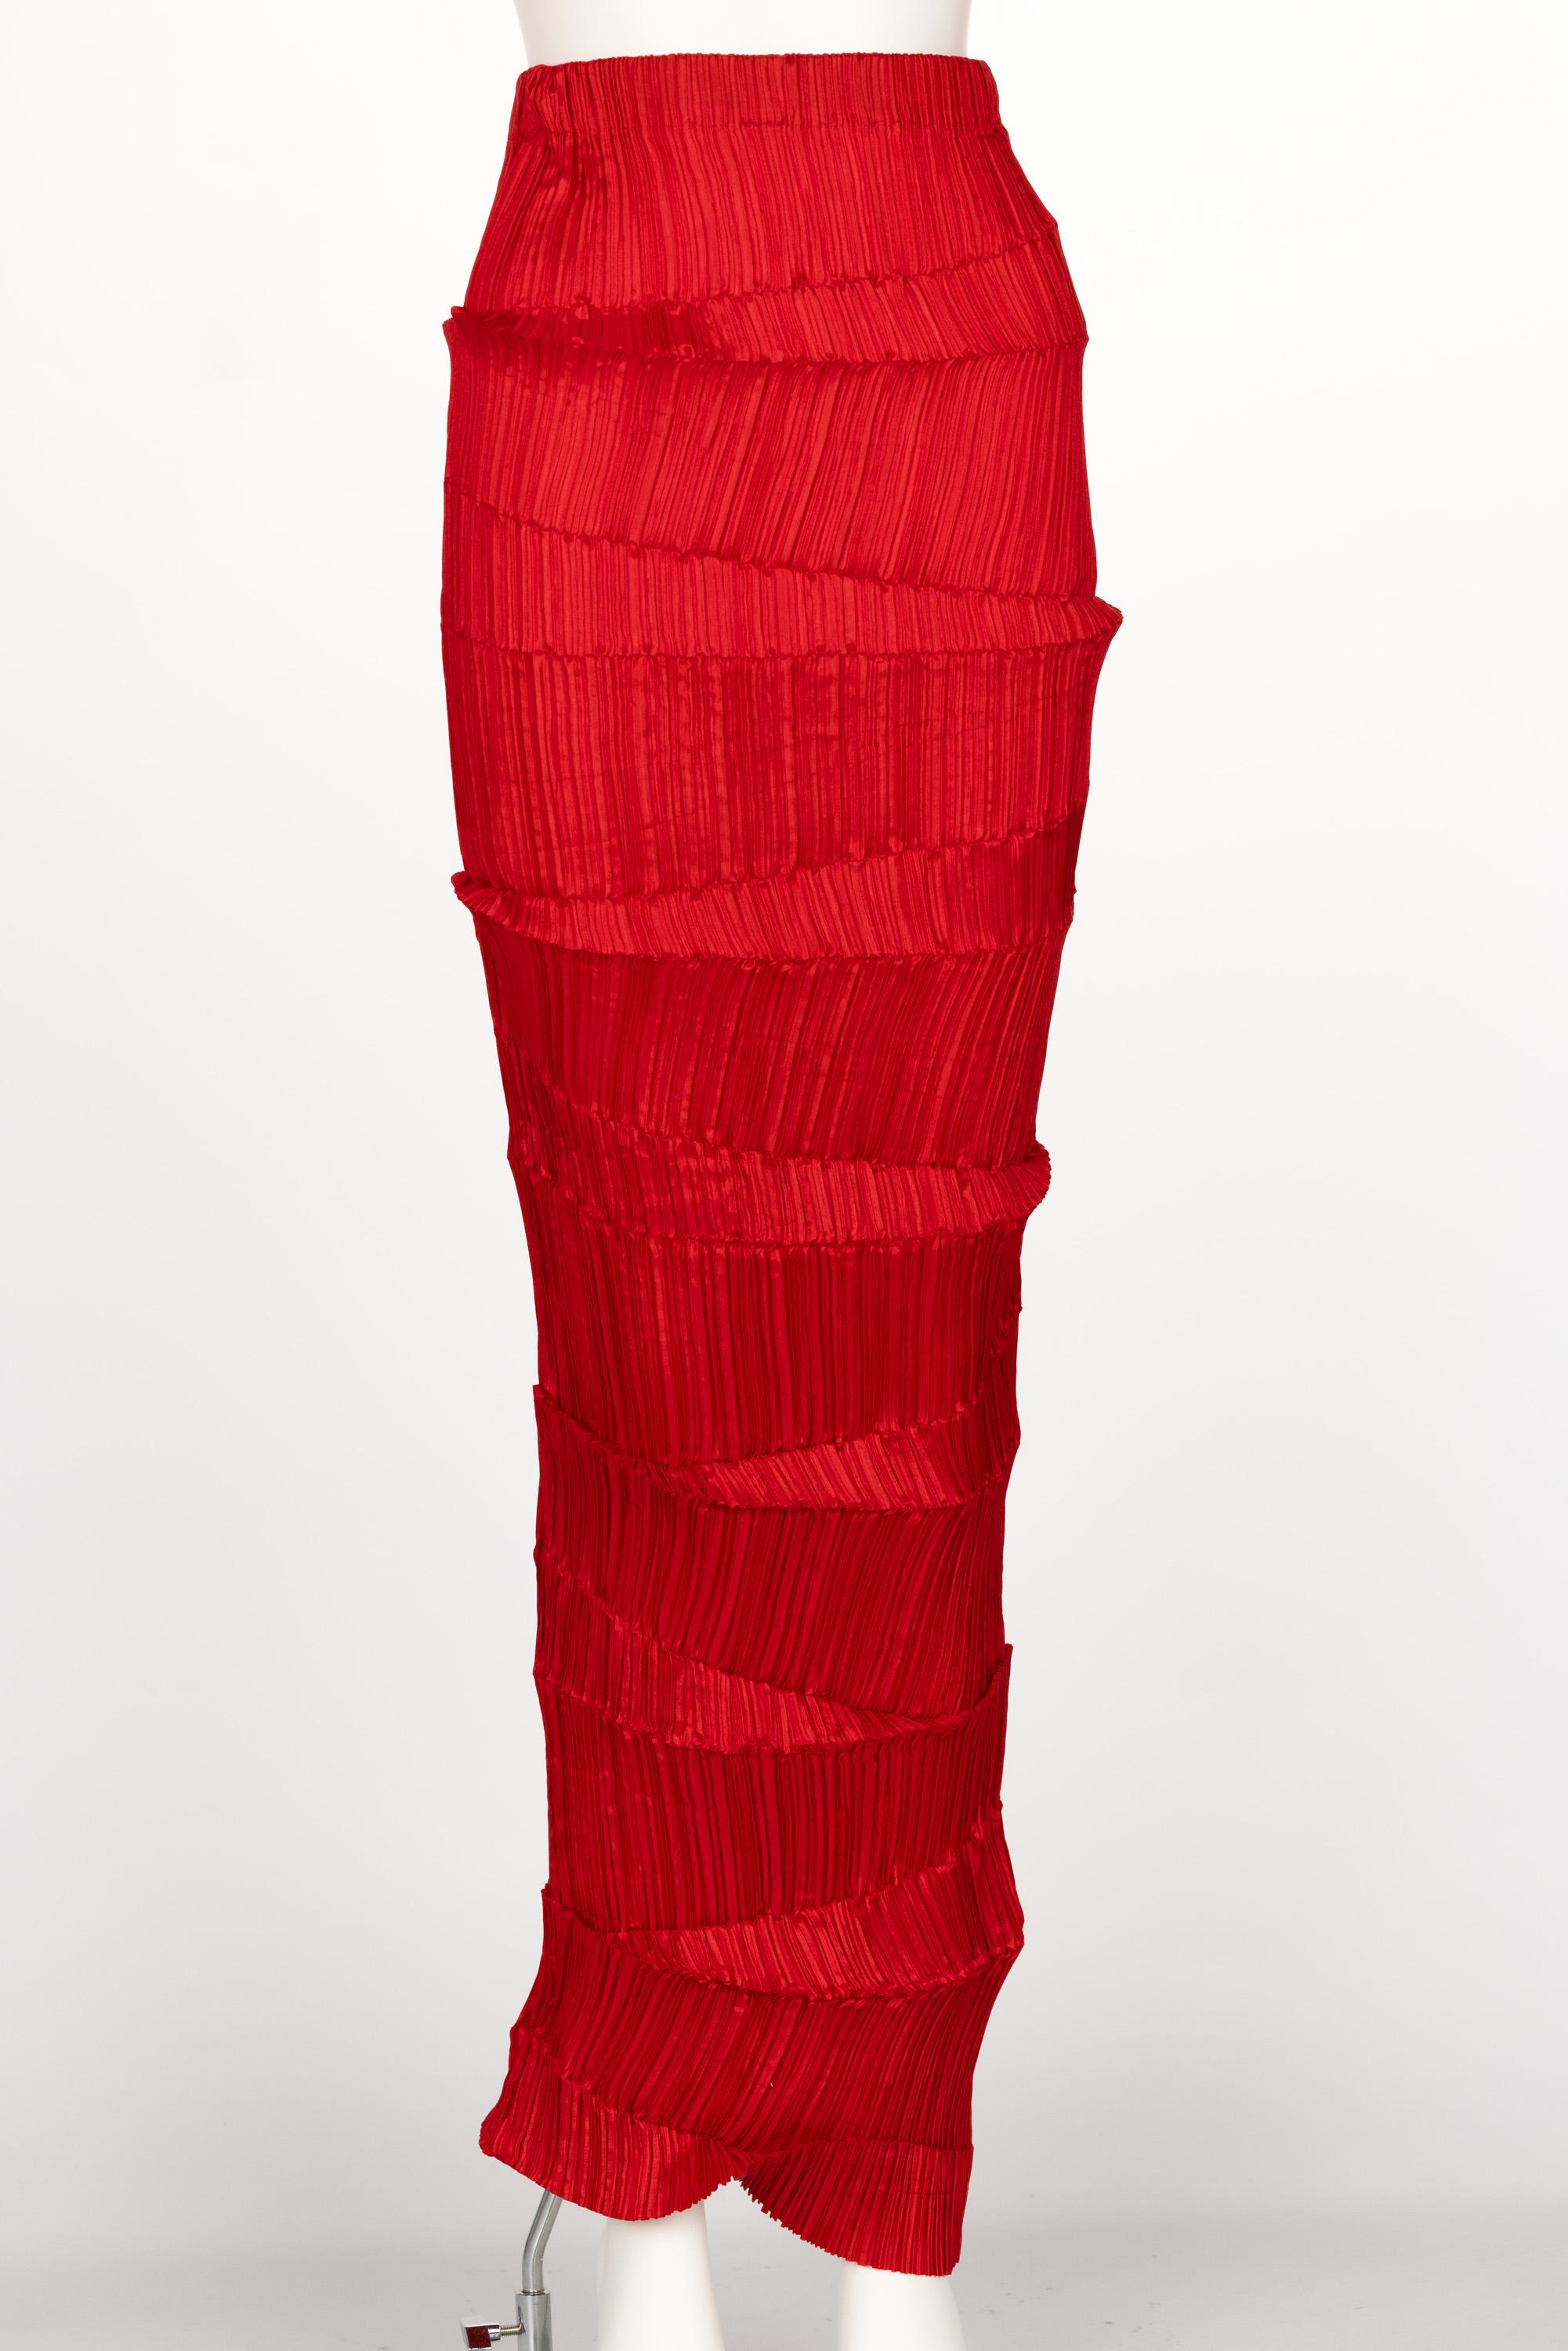 Incredible 1990s Issey Miyake Pleated Red Top & Skirt Ensemble For Sale 5